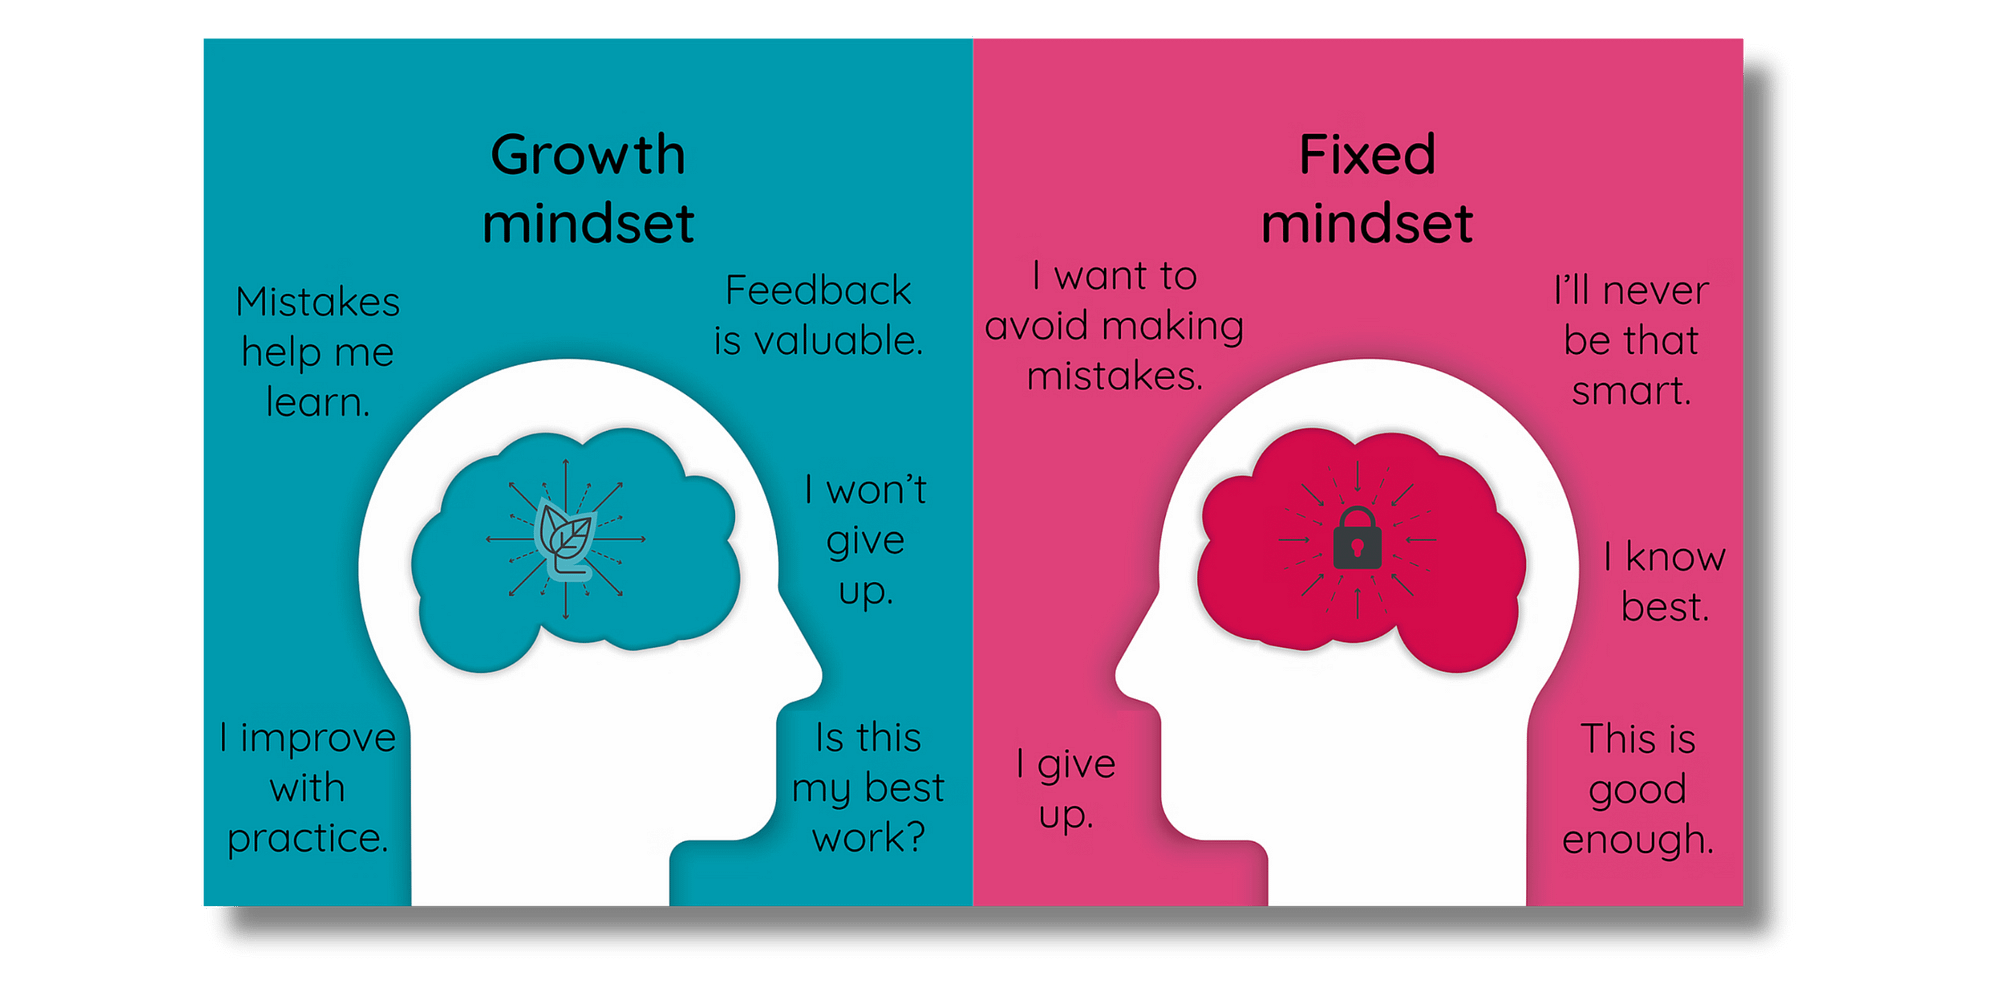 A diagram to demonstrate the differences between a 'growth mindset' and 'fixed mindset'